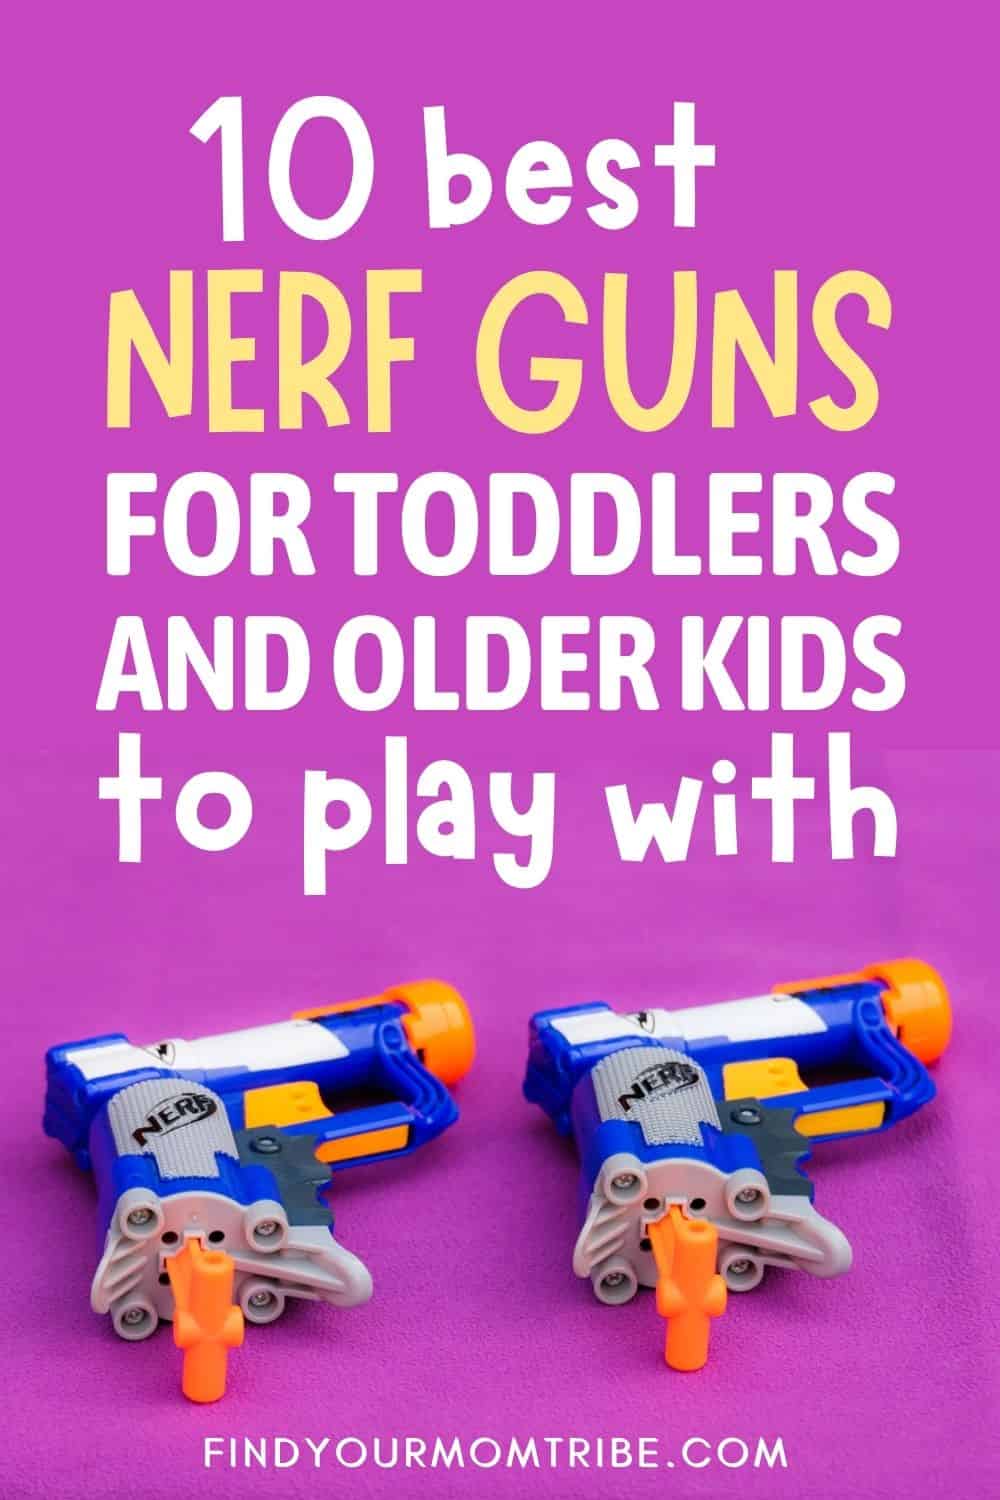 10 Best Nerf Guns For Toddlers And Older Kids To Play With Pinterest